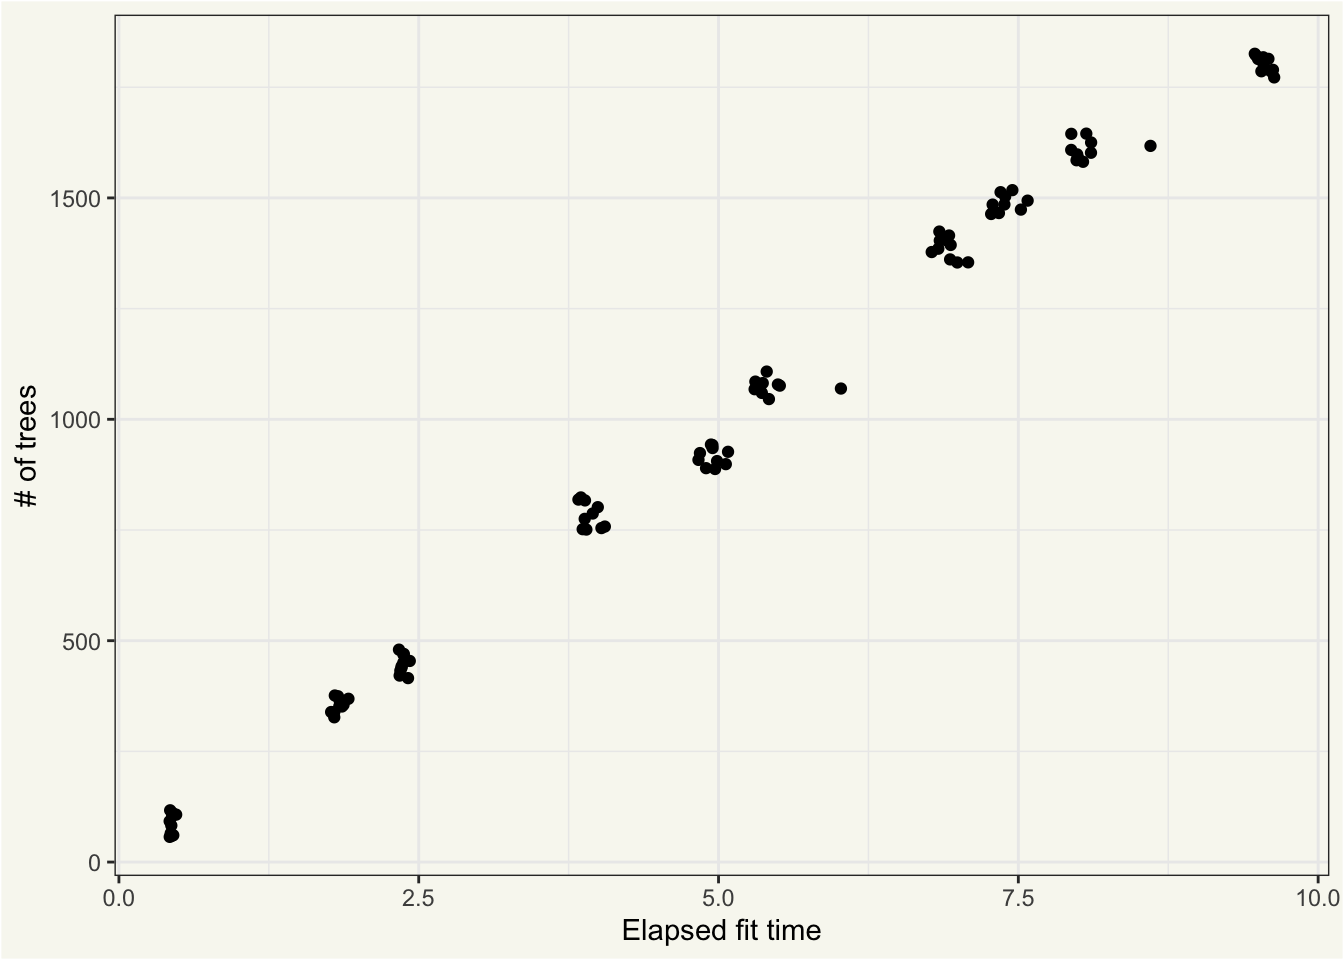 A ggplot dotplot showing a very strong, linear, positive correlation between elapsed fit time and number of trees.